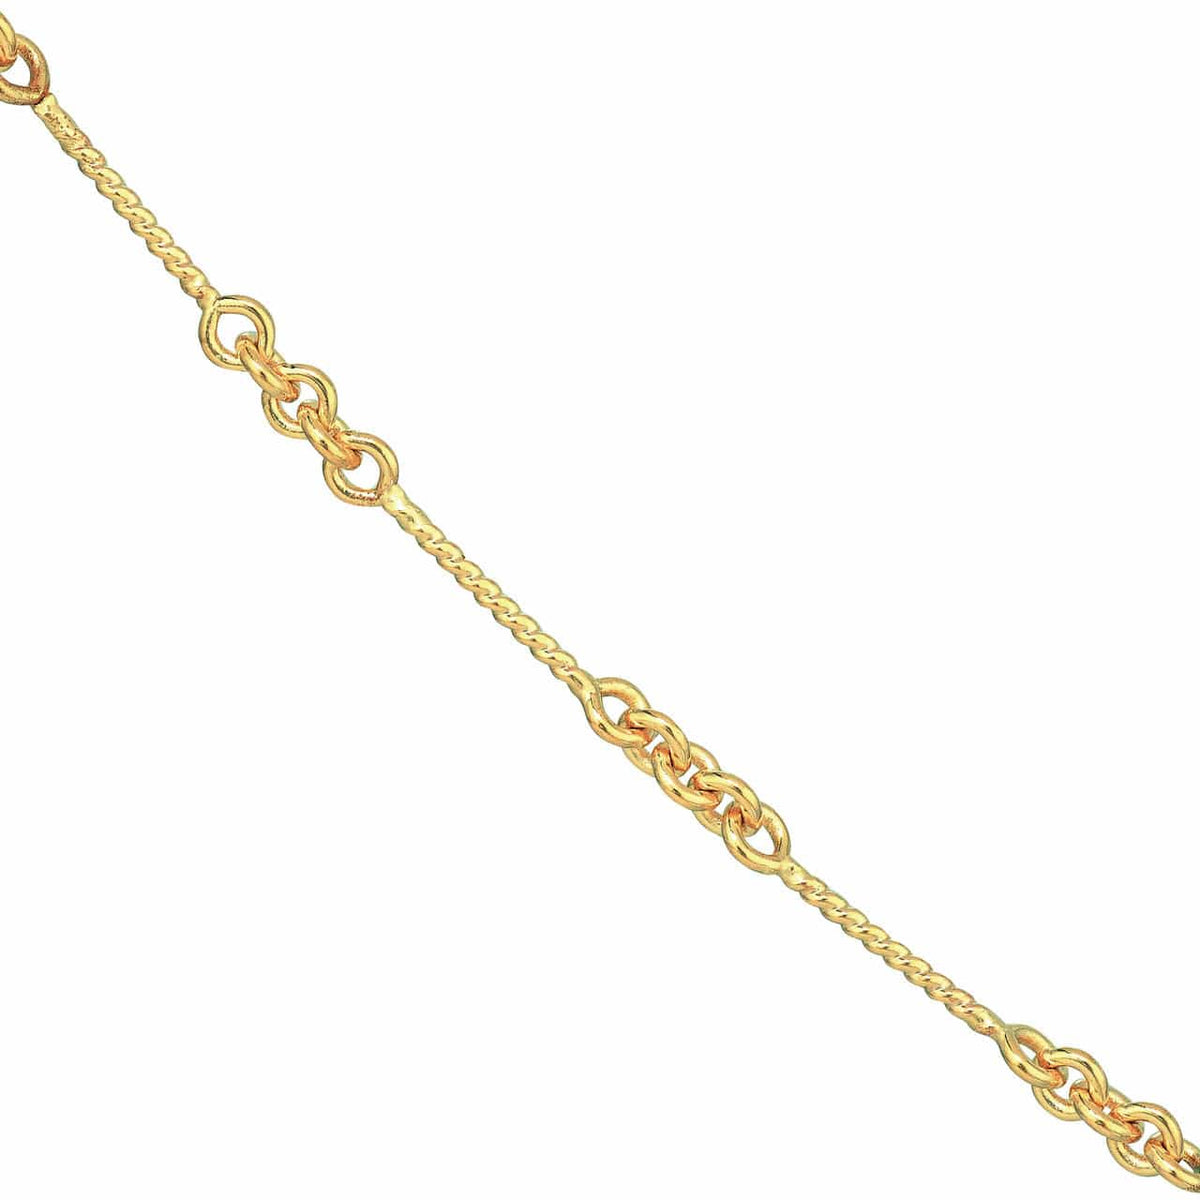 14K Yellow Gold and White Gold 0.8mm Designer Twist Chain Necklace with Lobster Lock